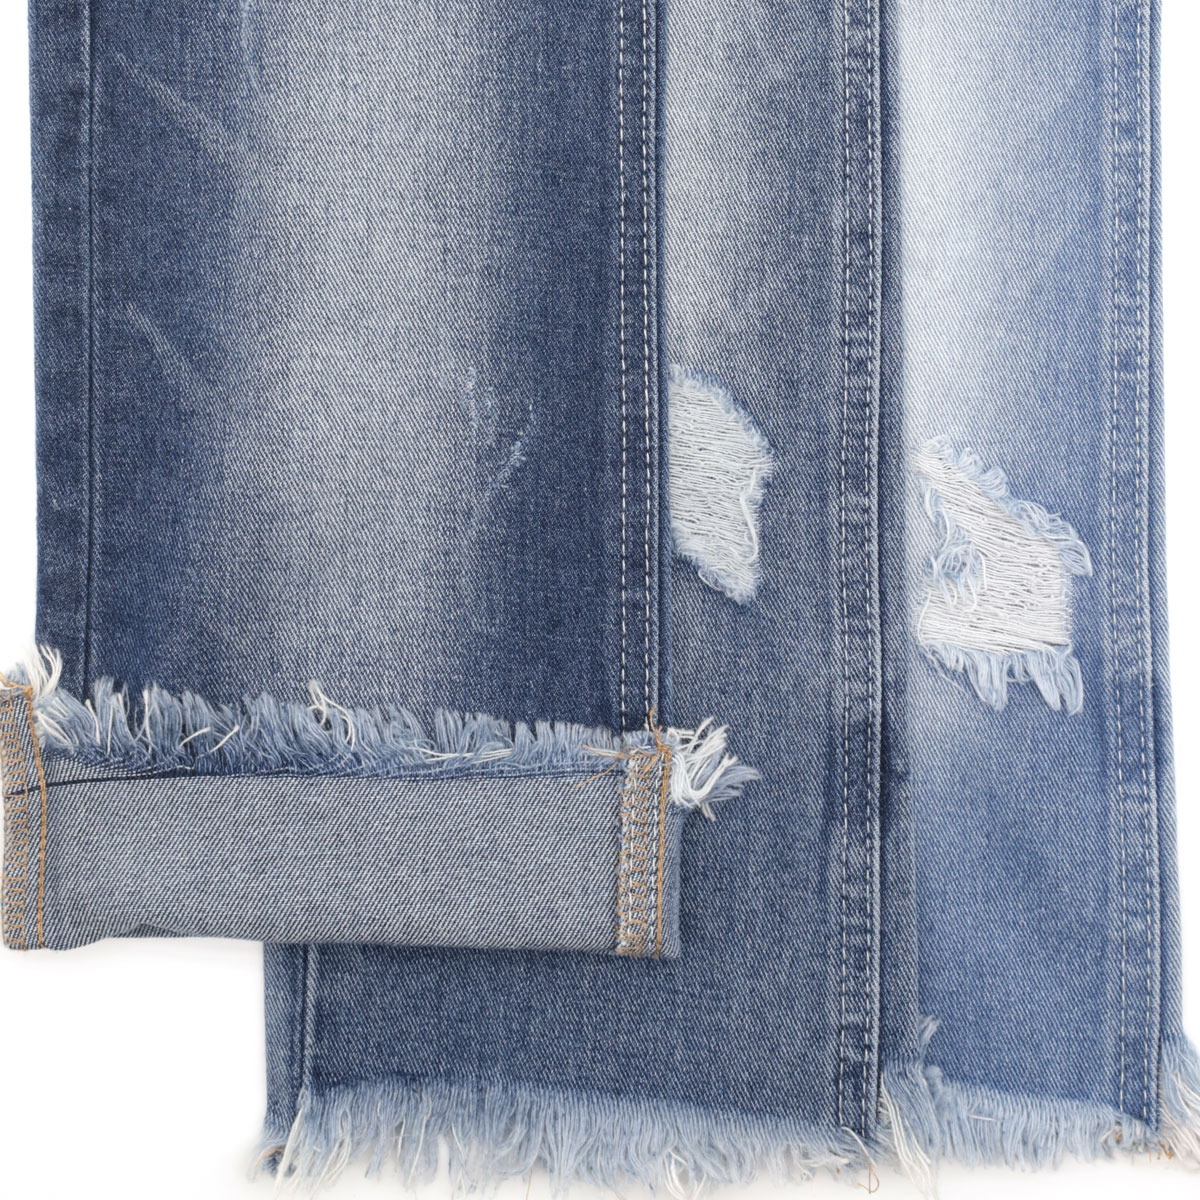 15 Interesting Facts About Denim Fabric 2